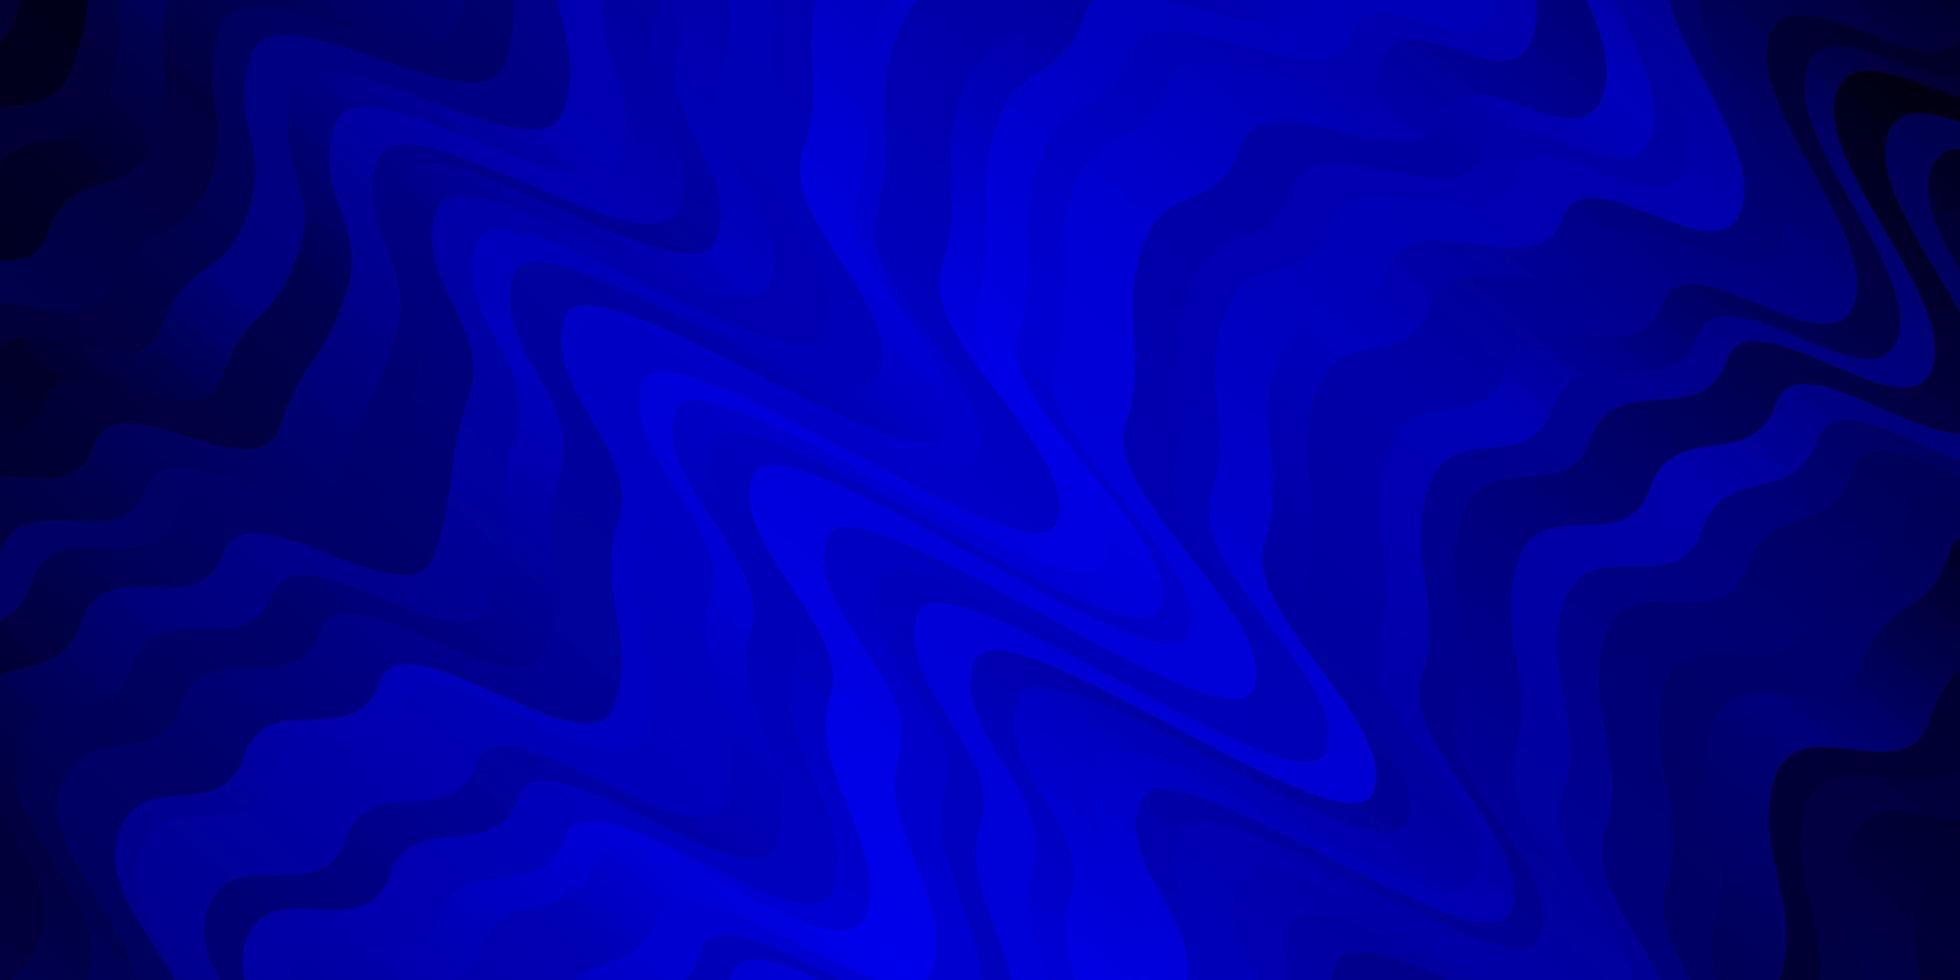 Dark BLUE vector background with curved lines